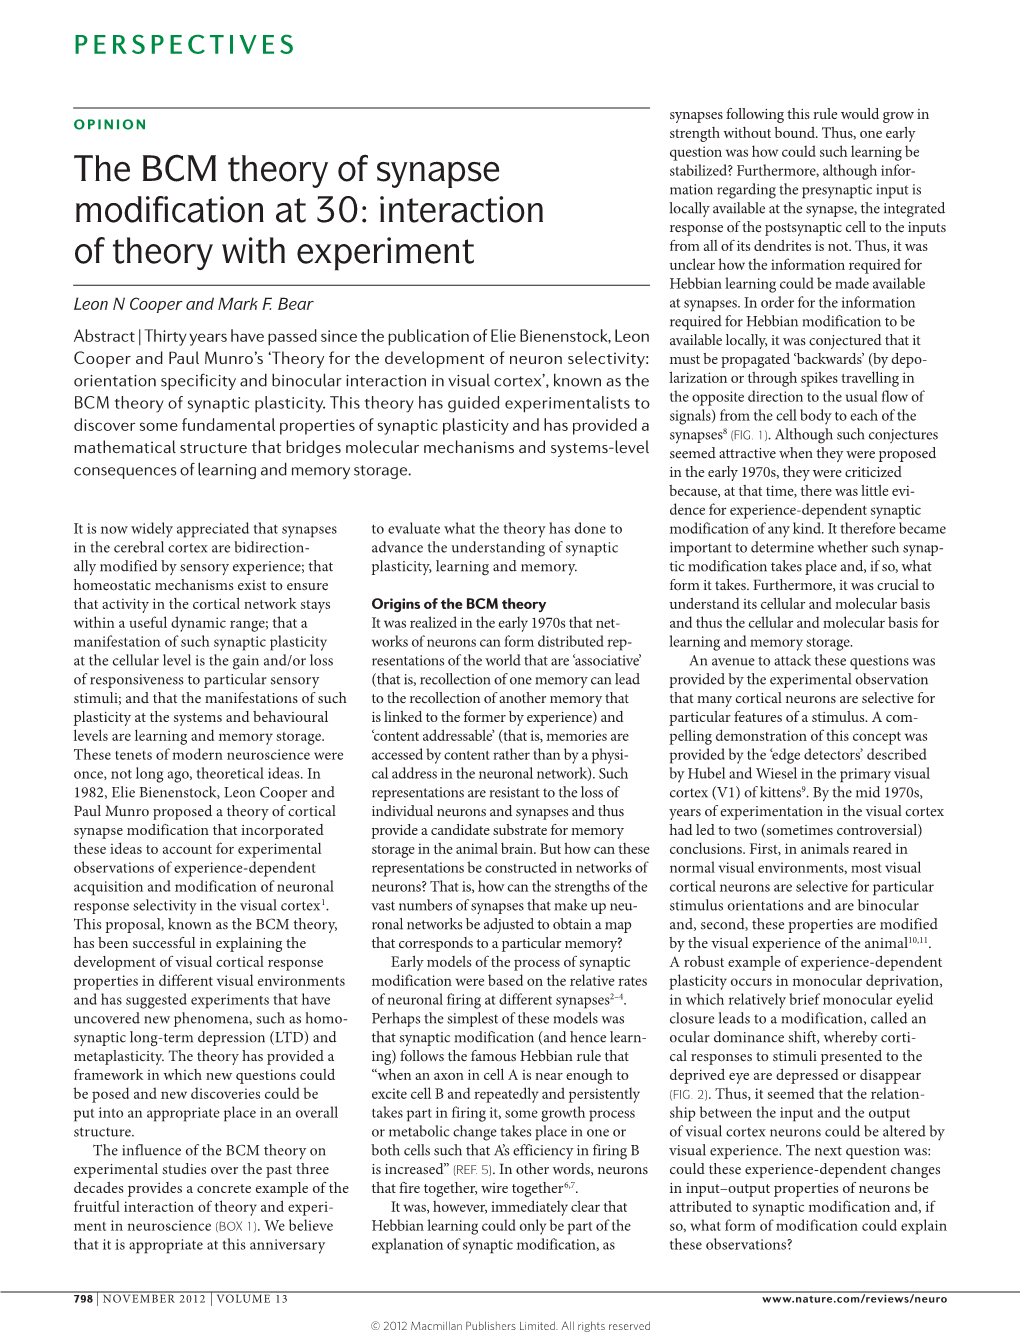 The BCM Theory of Synapse Modification at 30